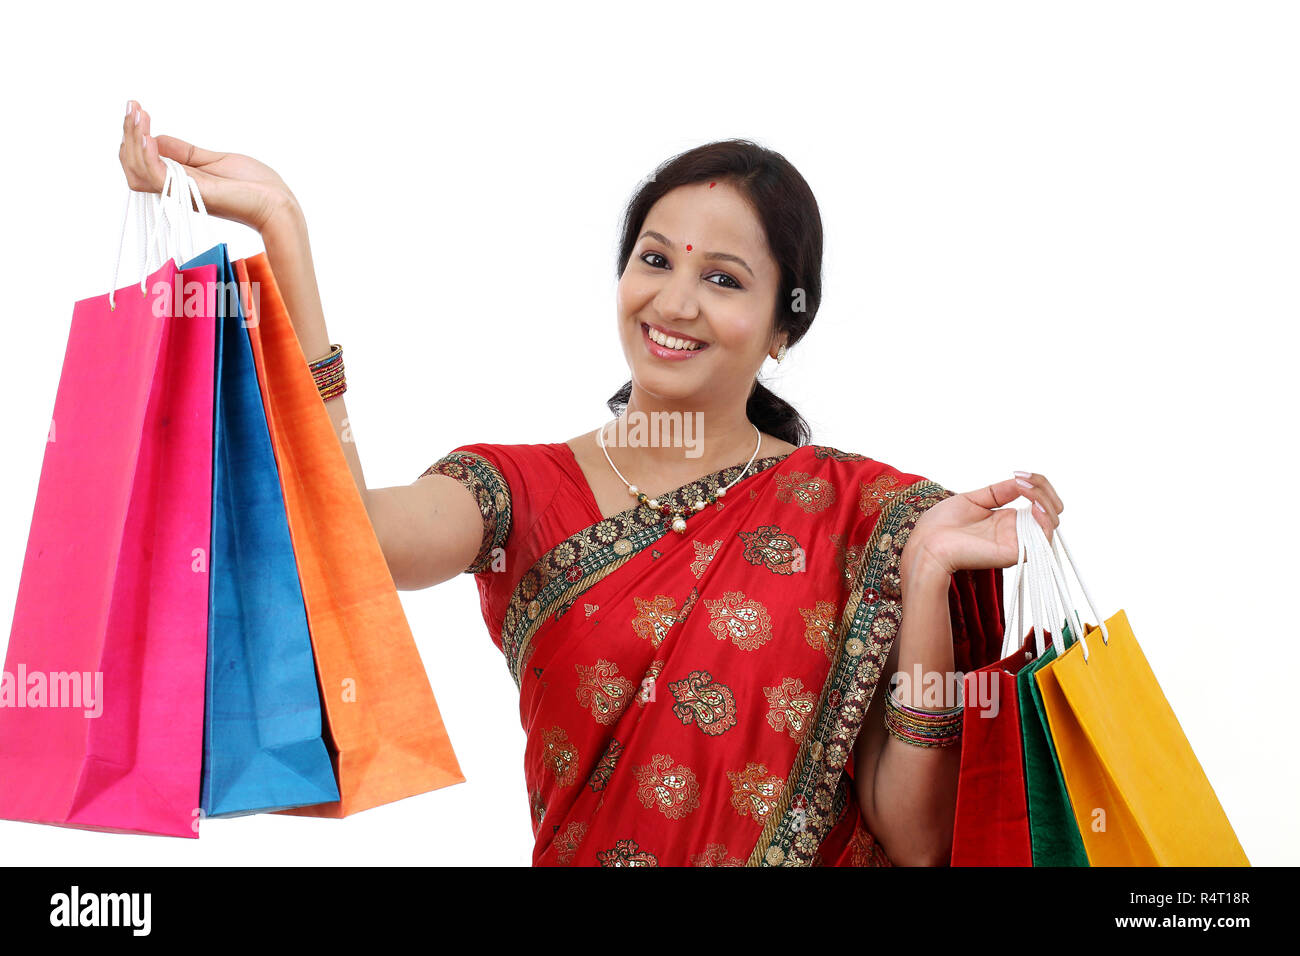 Young traditional Indian woman holding shopping bags Stock Photo